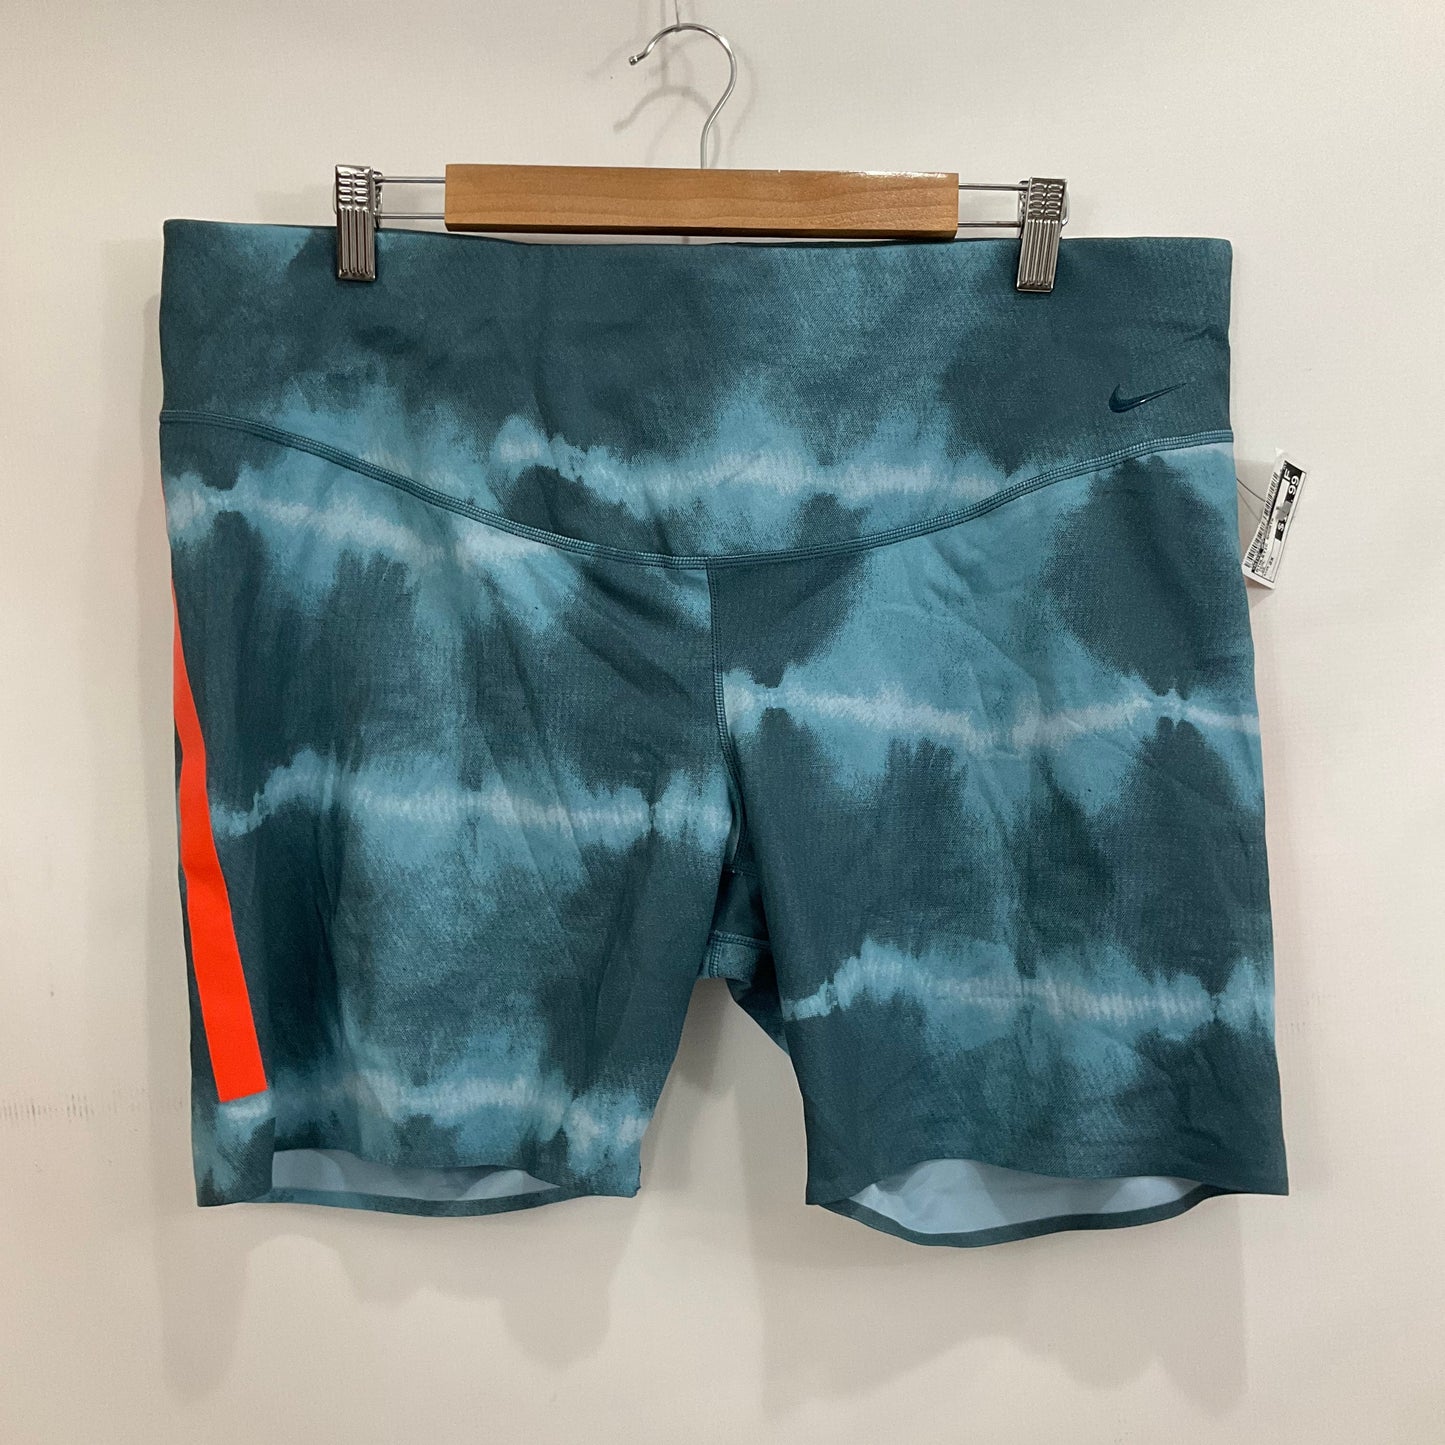 Teal Athletic Shorts Nike Apparel, Size 2x